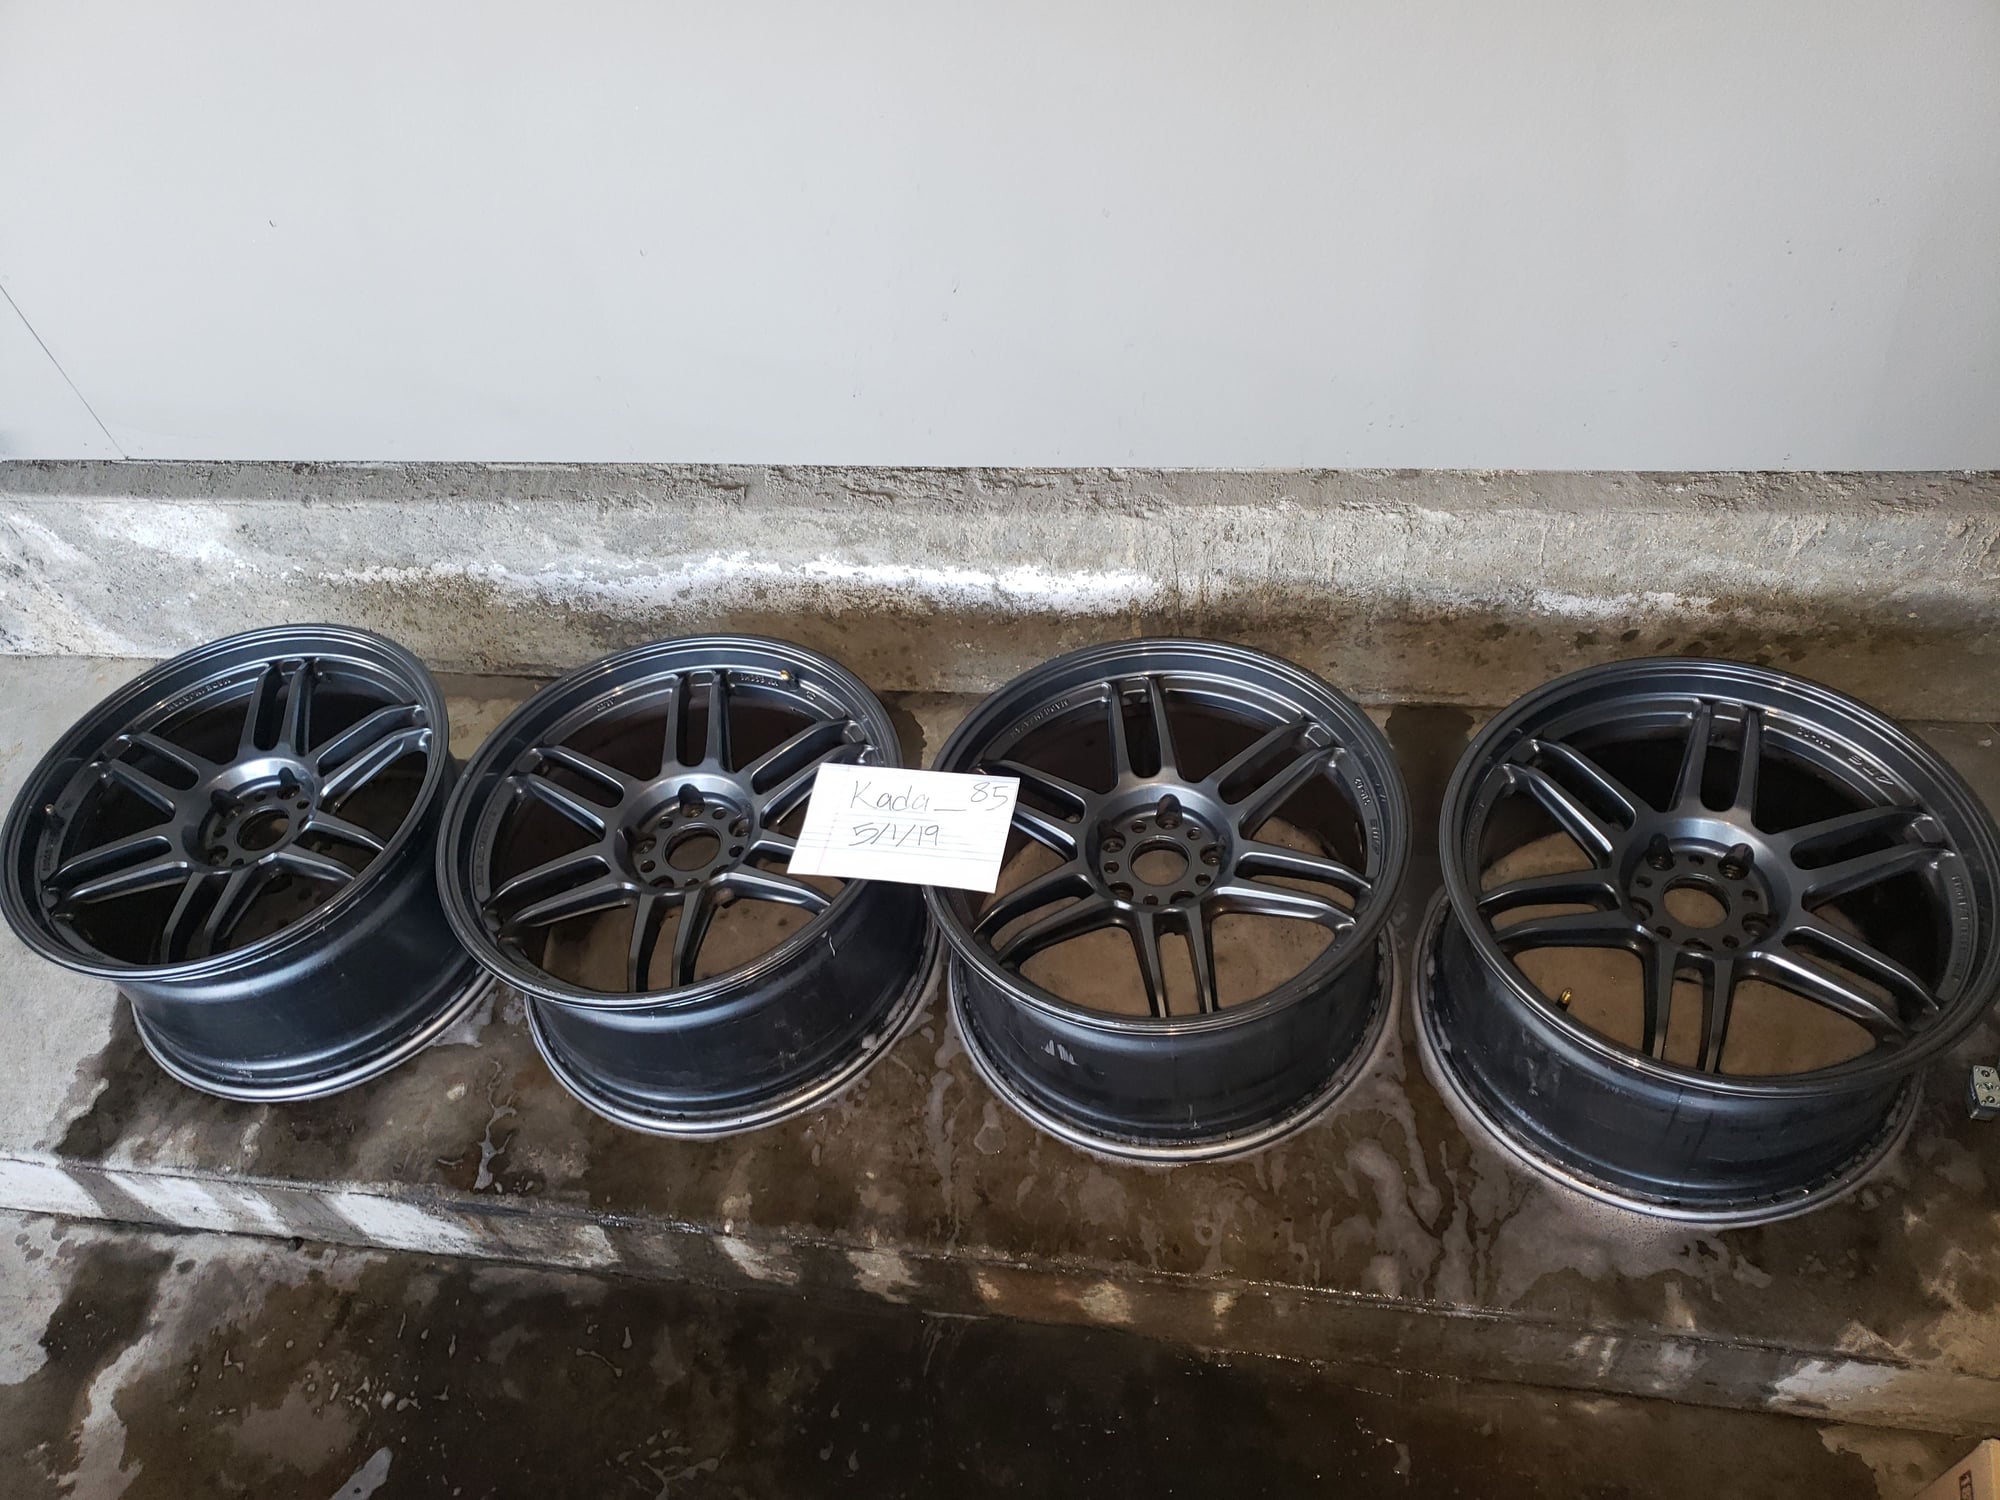 Wheels and Tires/Axles - AME TM02 Tracer 18x9.5 +22 5x114.3 - Used - Los Angeles, CA 90011, United States